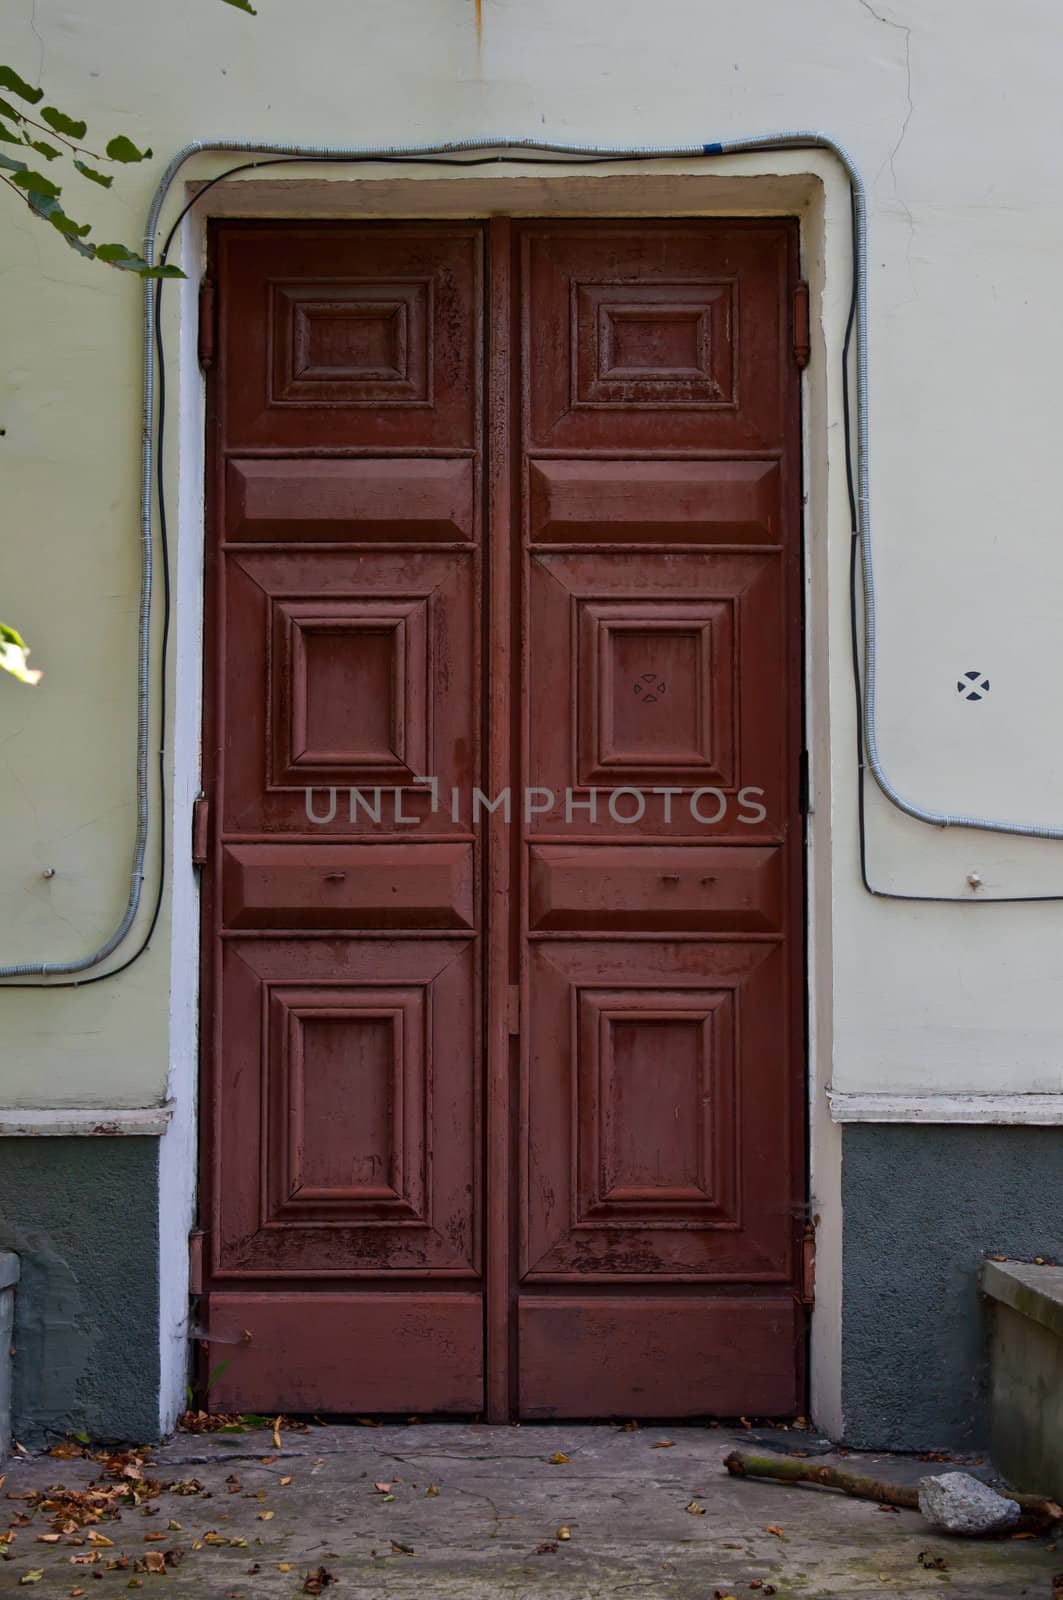 The entrance to the old building. The city of Kaliningrad. Russian Federation.